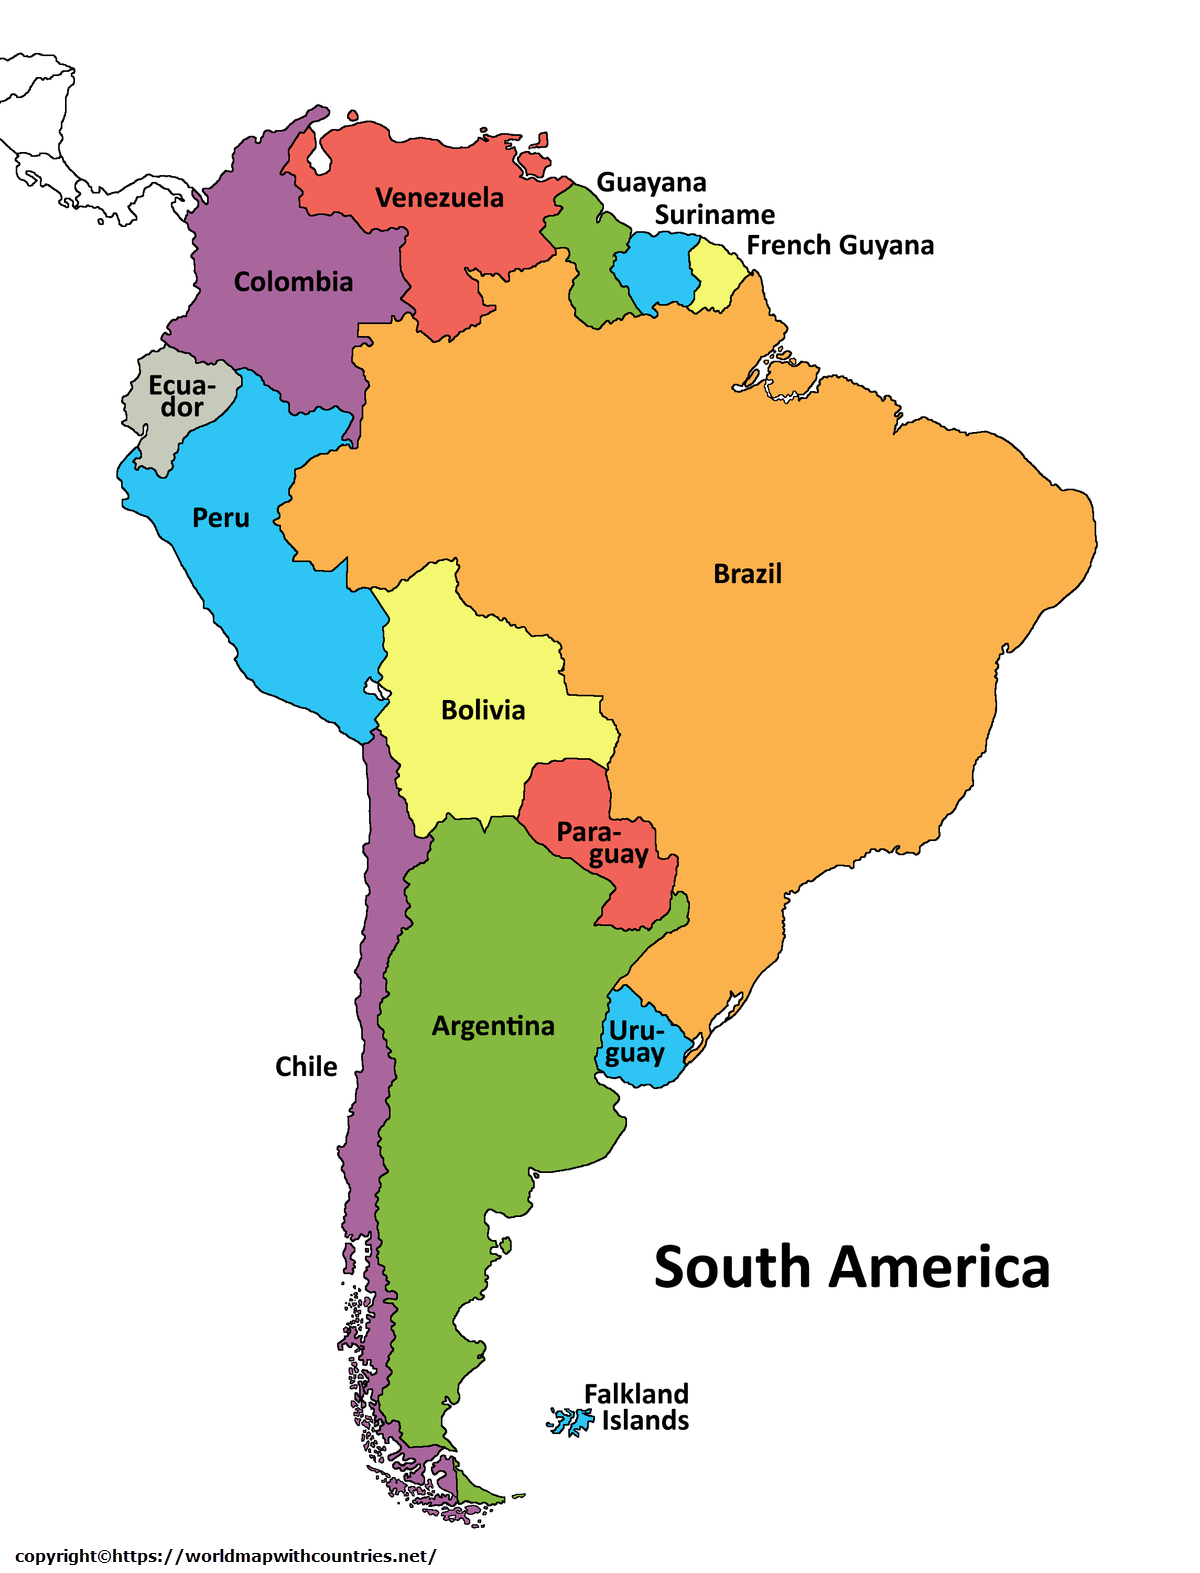 4 Free Political Map of South America with Countries in PDF | World Map ...